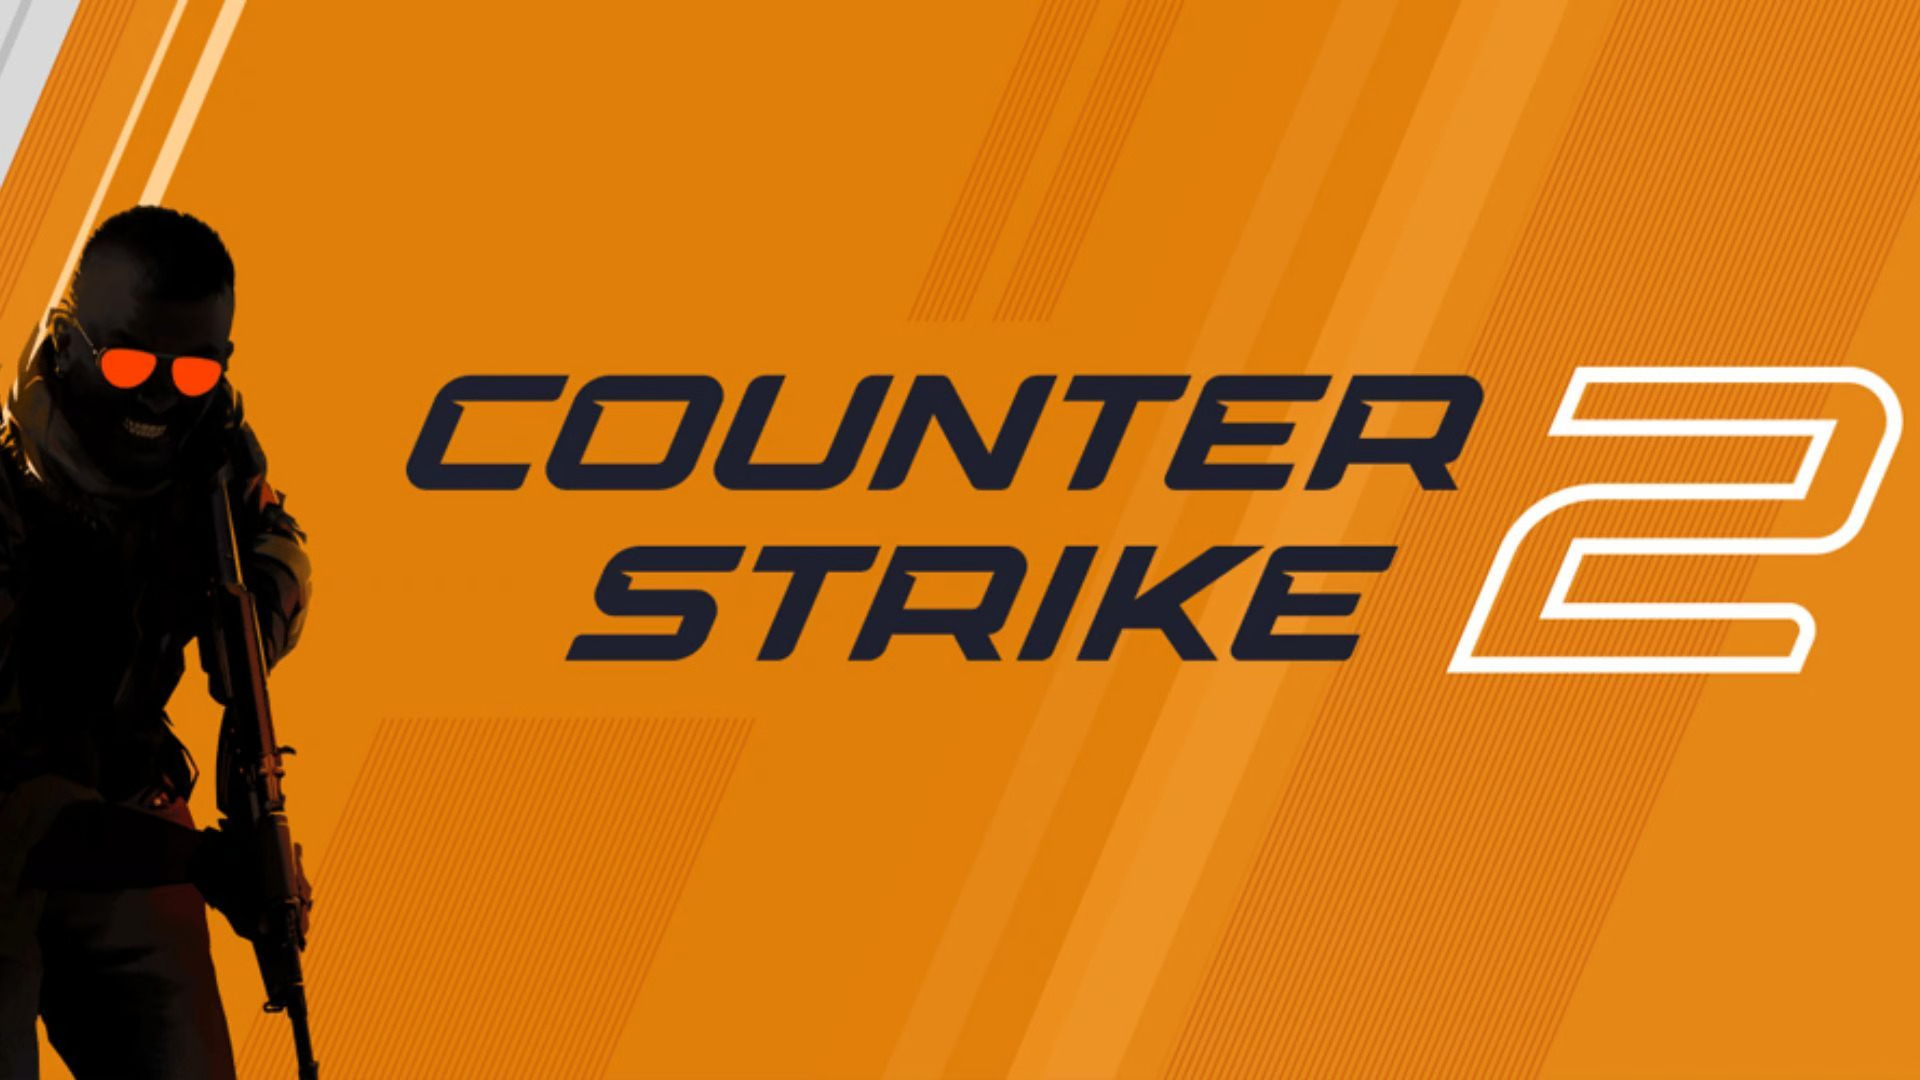 Valve might be preparing to release Counter-Strike 2 on September 27 - Xfire